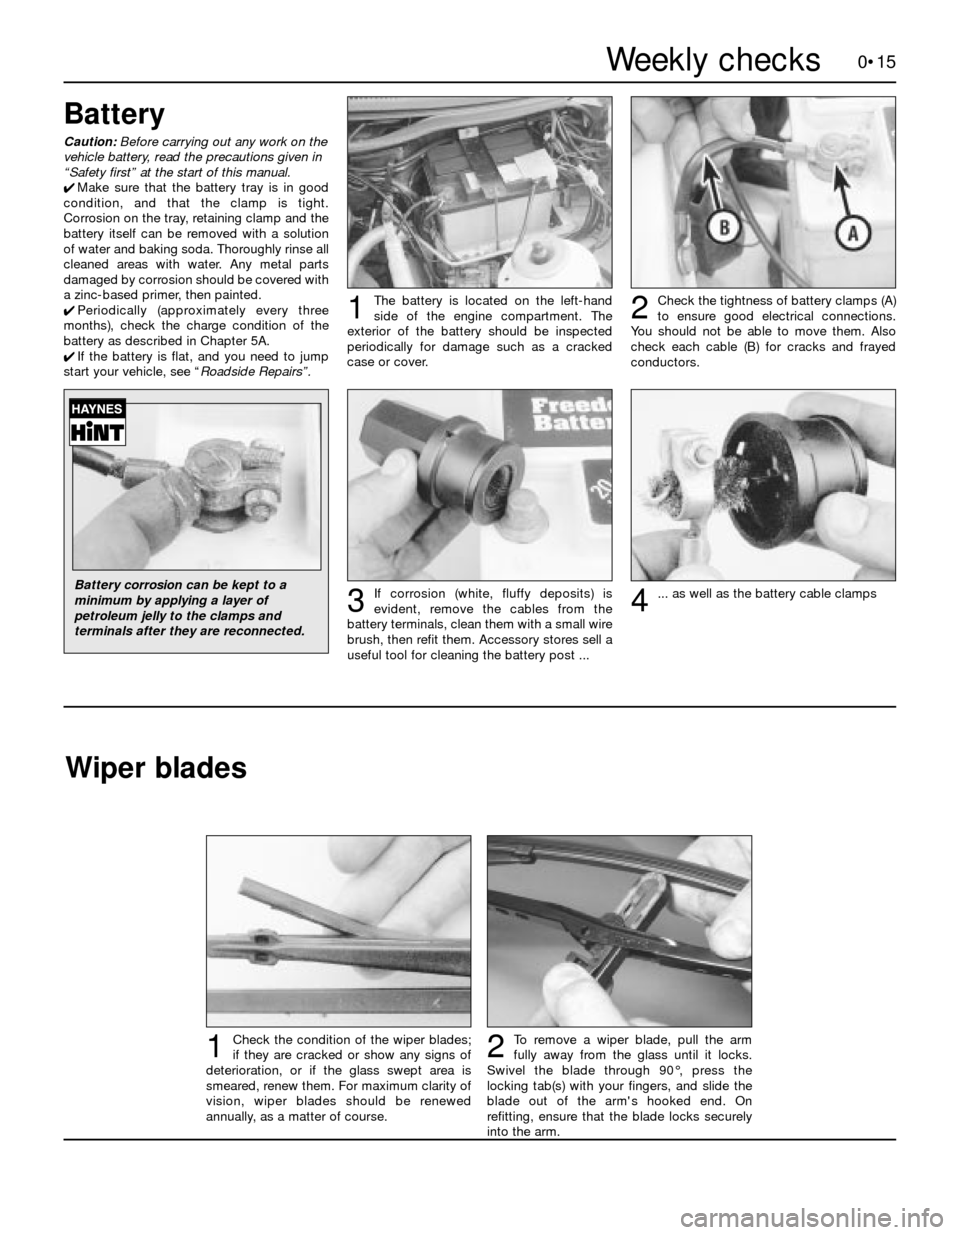 FORD SIERRA 1993 2.G Introduction Workshop Manual 0•15
To remove a wiper blade, pull the arm
fully away from the glass until it locks.
Swivel the blade through 90°, press the
locking tab(s) with your fingers, and slide the
blade out of the arms h